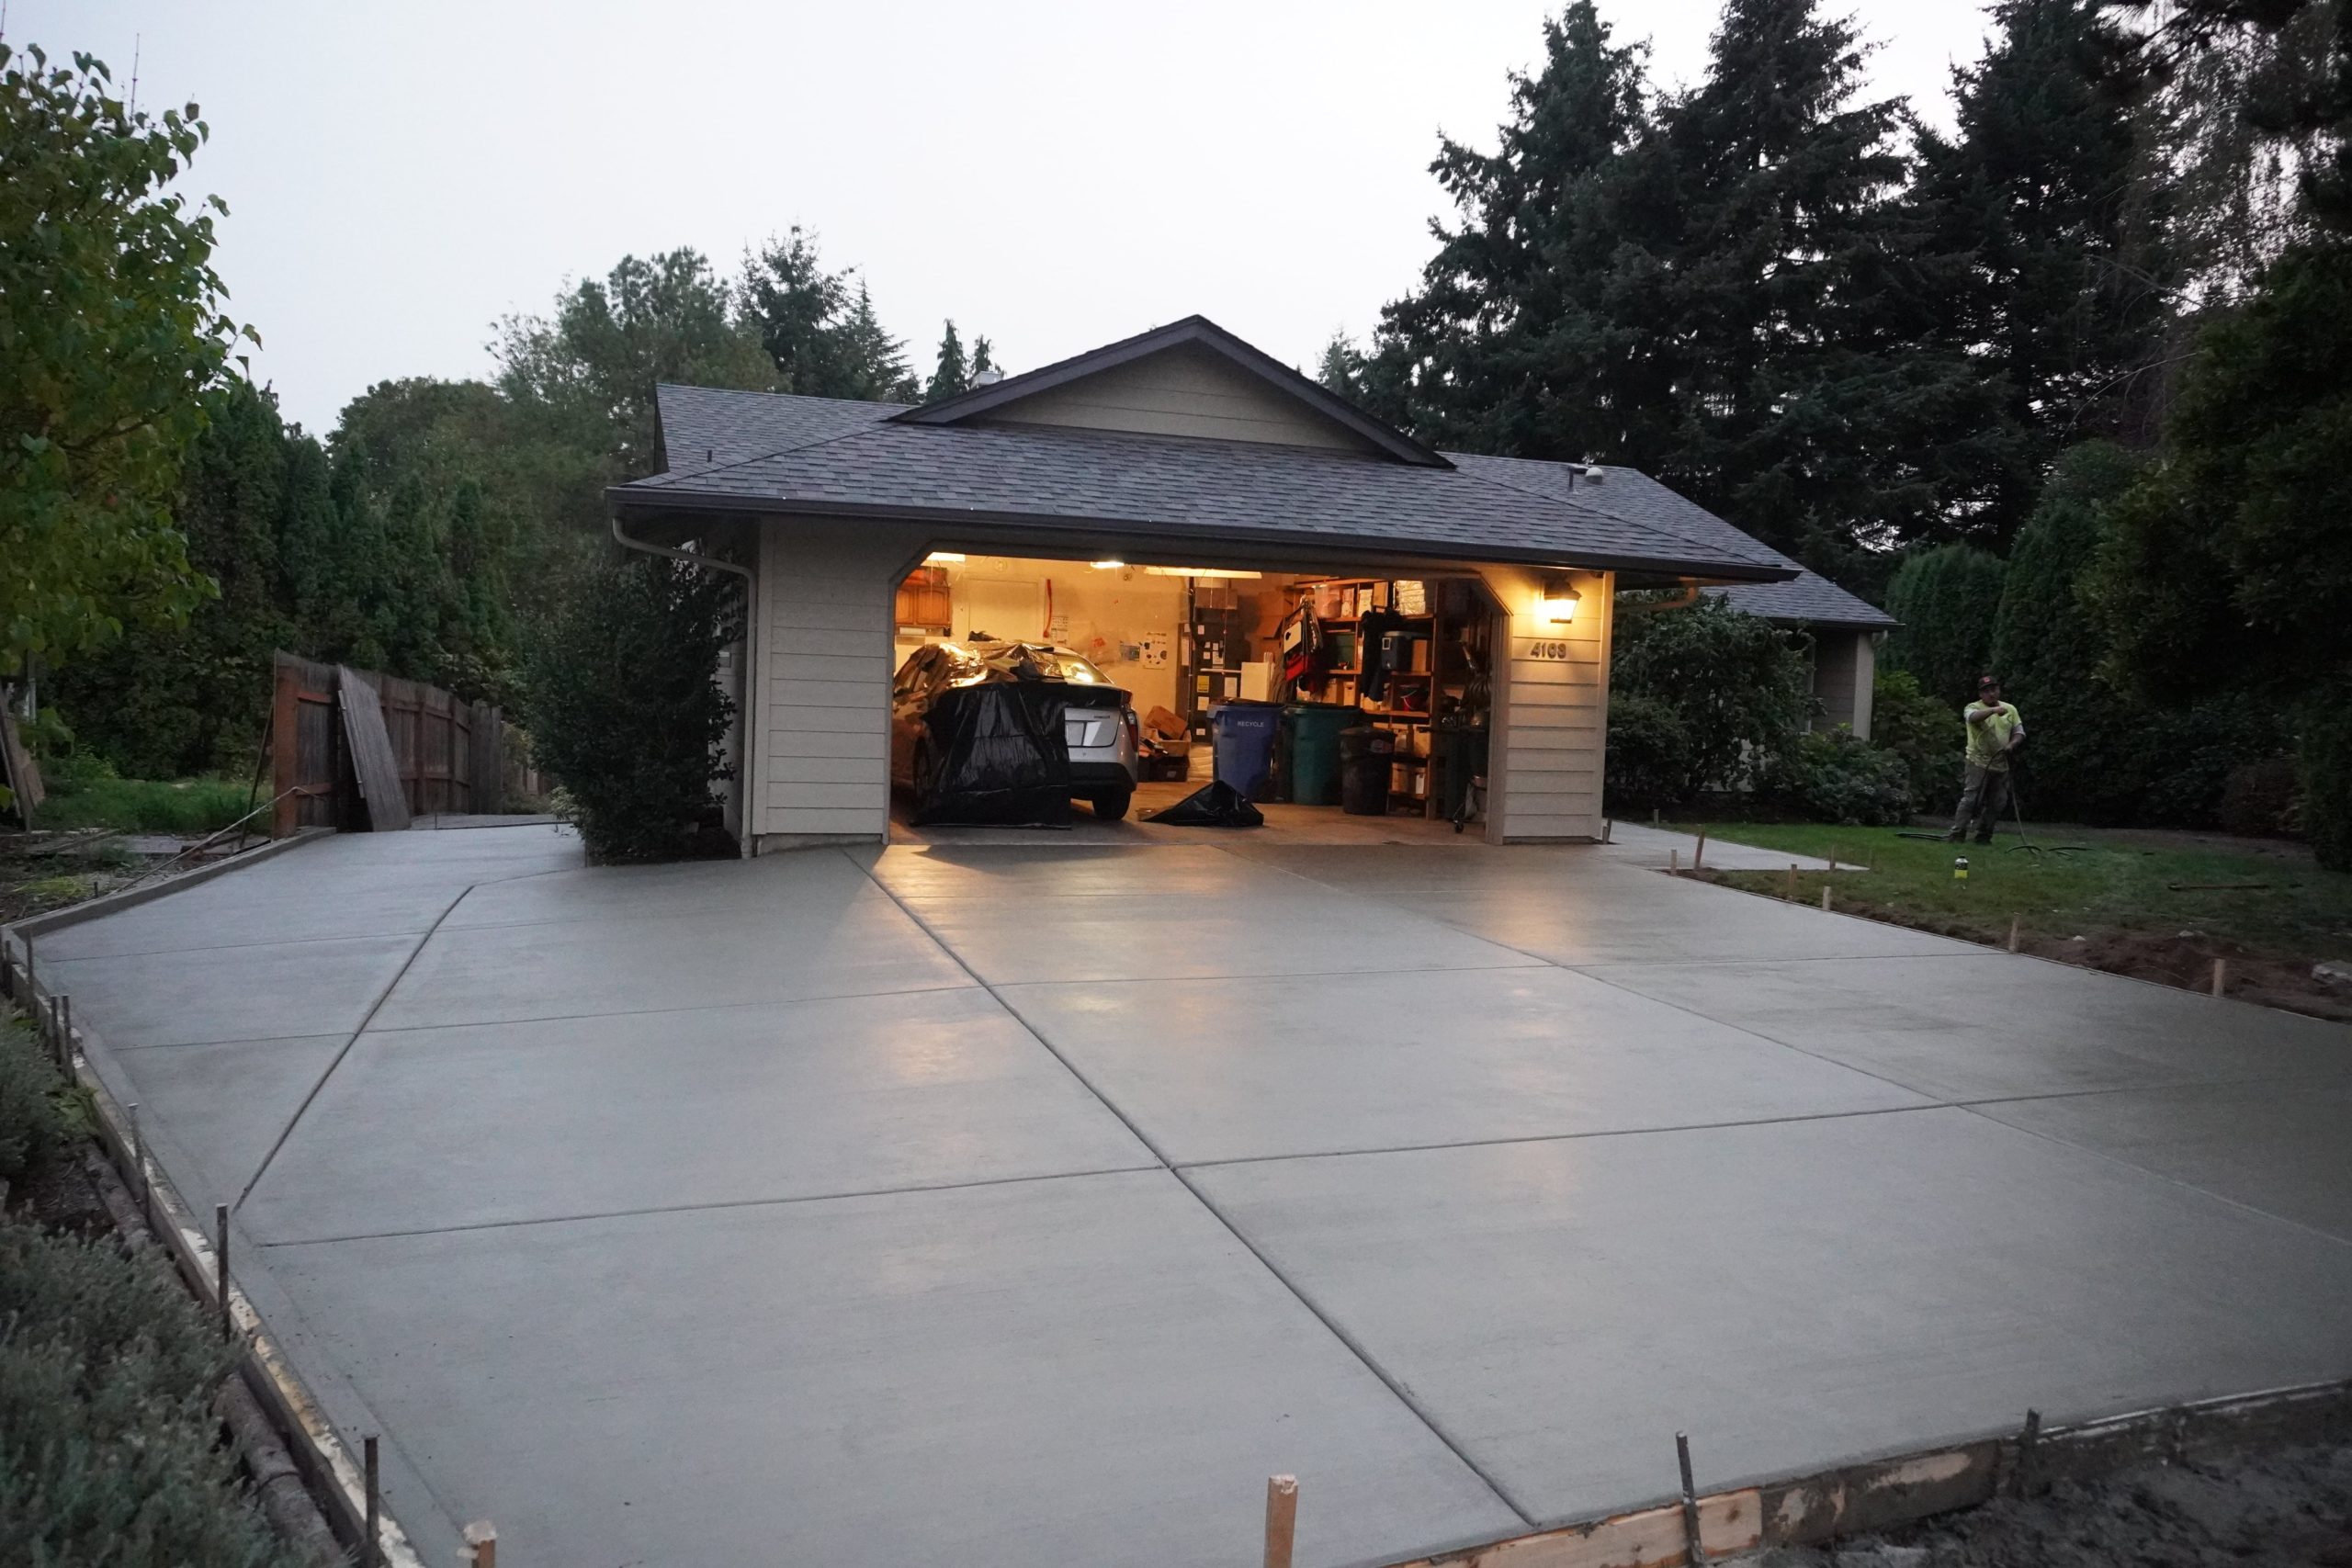 HOW TO MAKE YOUR CONCRETE DRIVEWAY MORE APPEALING